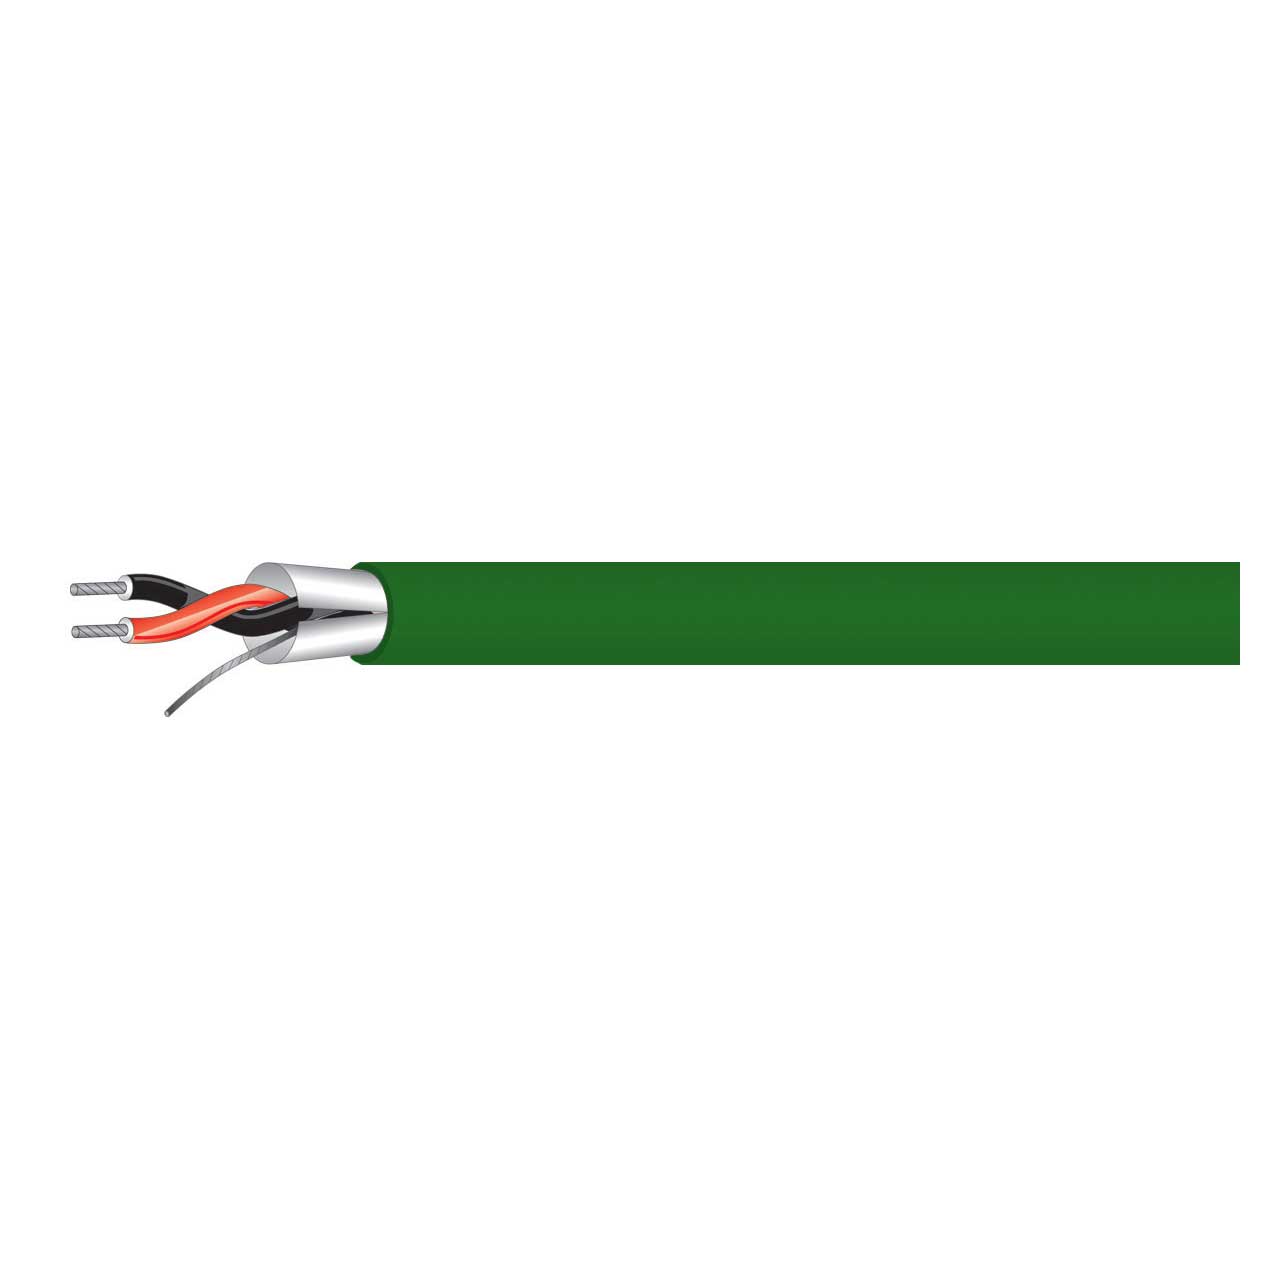 West Penn 454 1-Pair 22Awg CM Miniature Line Level Audio Cable - Green - 500 Feet  454-500GN